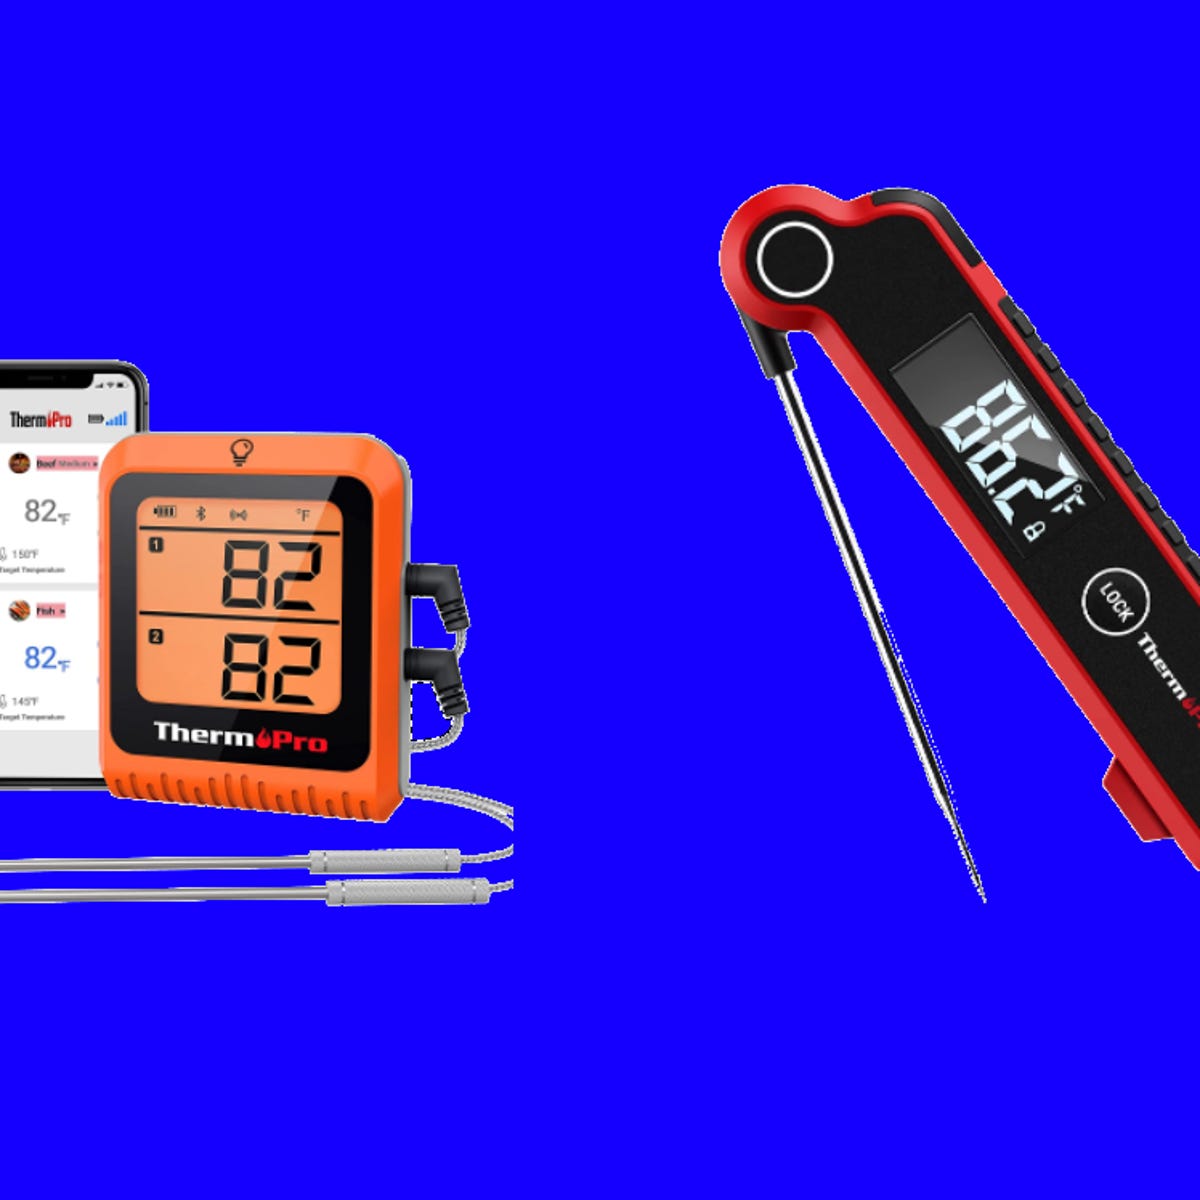 ThermoPro Meat Thermometers Are at All-Time Low Prices Right Now - CNET